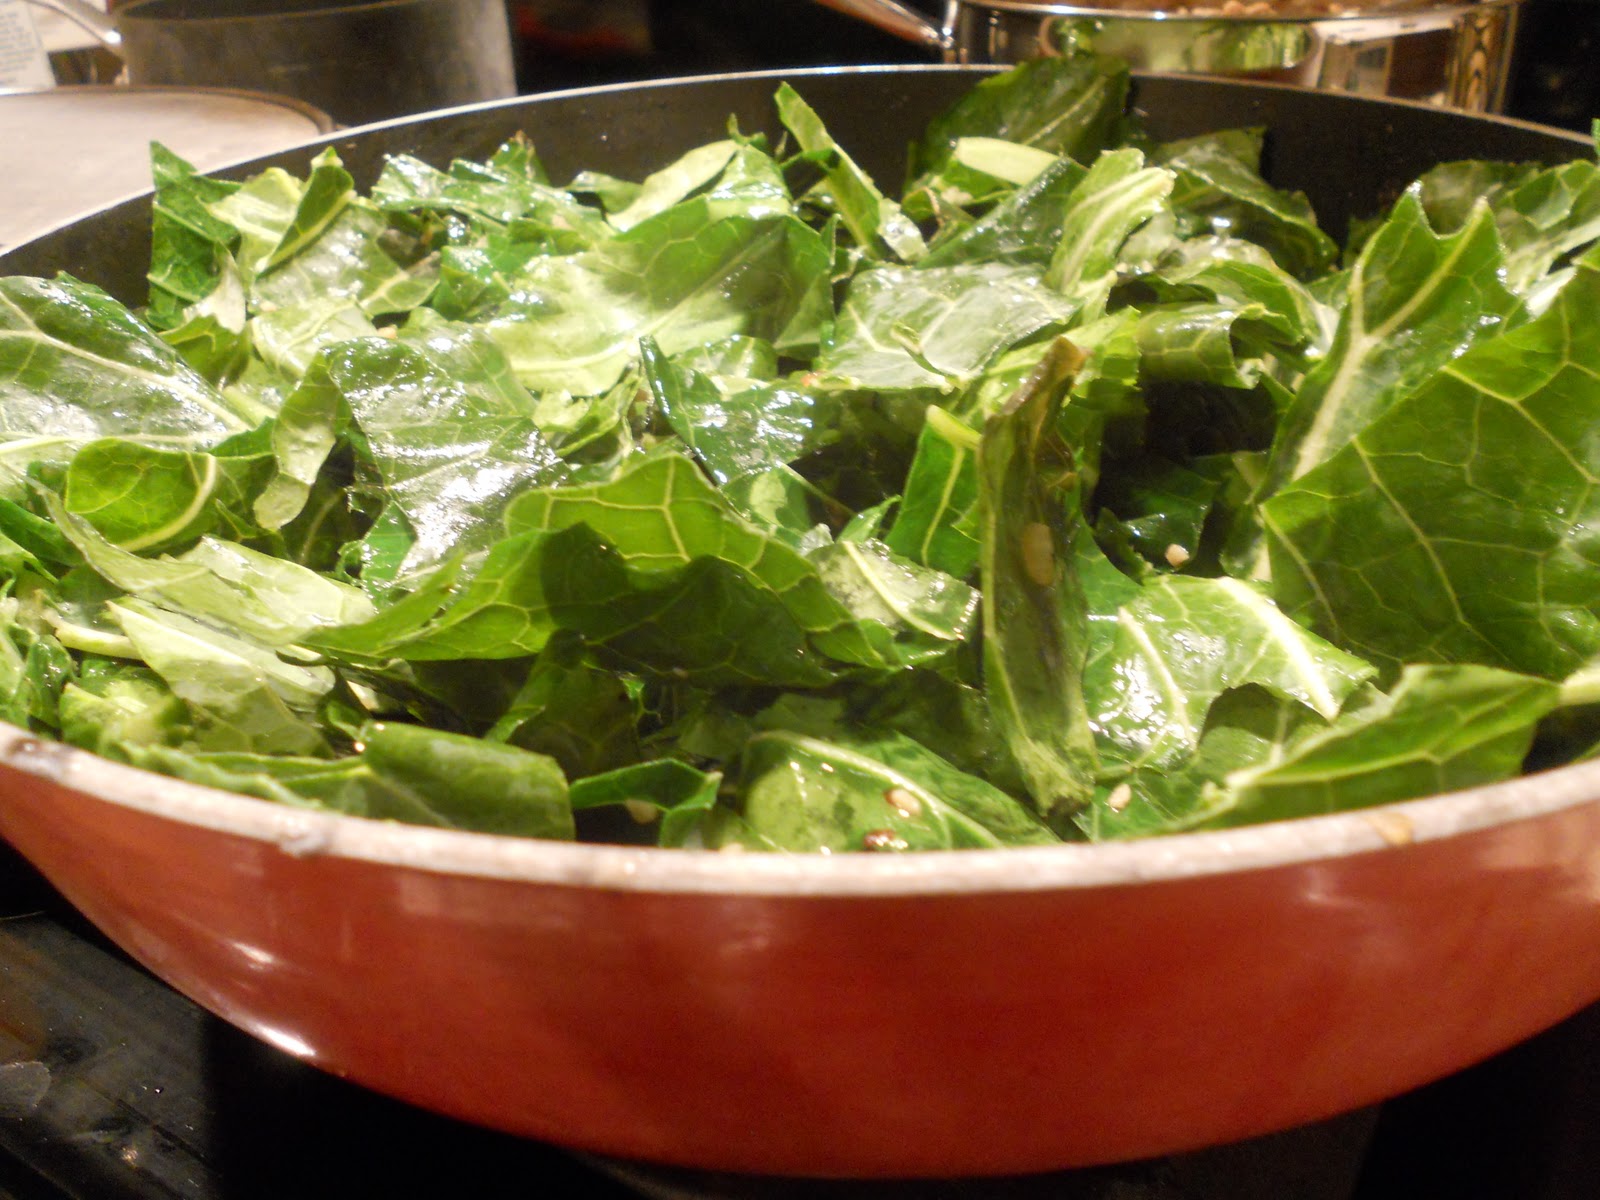 Braised Collard Greens ~ Simple, savory, and easy to make with just a few ingredients. Perfect for St. Patrick's Day!